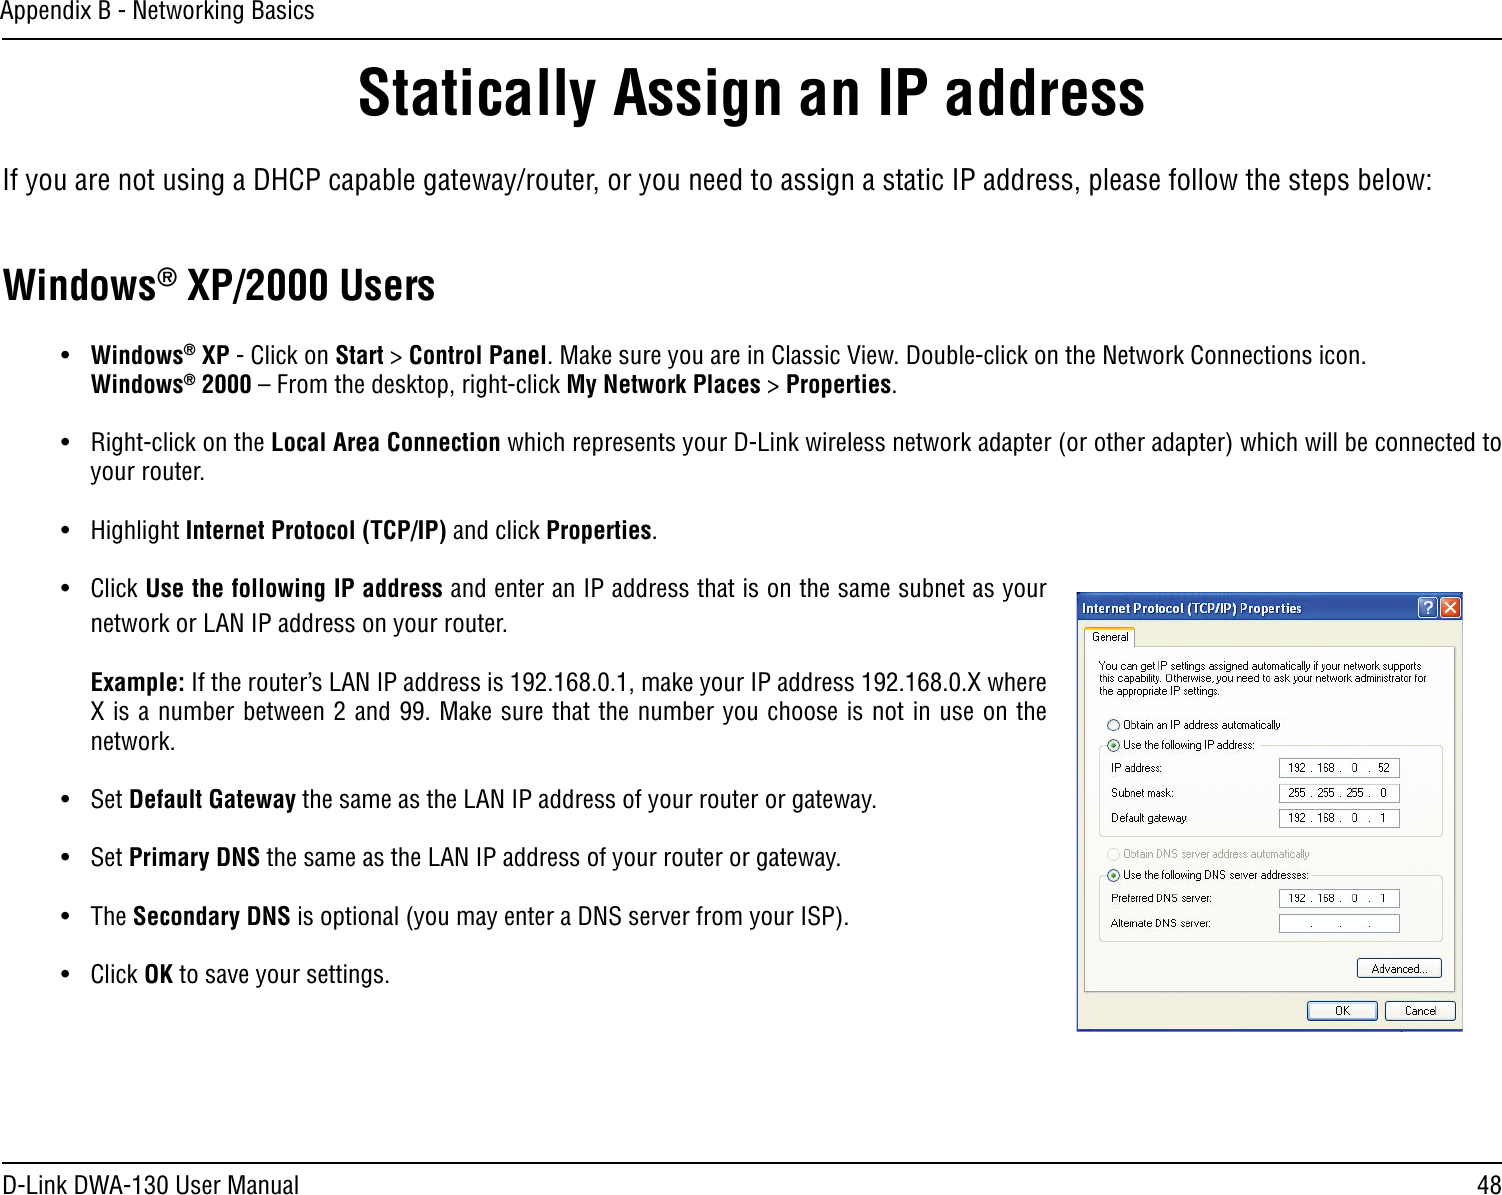 48D-Link DWA-130 User ManualAppendix B - Networking BasicsStatically Assign an IP addressIf you are not using a DHCP capable gateway/router, or you need to assign a static IP address, please follow the steps below:Windows® XP/2000 Users•  Windows® XP - Click on Start &gt; Control Panel. Make sure you are in Classic View. Double-click on the Network Connections icon. Windows® 2000 – From the desktop, right-click My Network Places &gt; Properties.•  Right-click on the Local Area Connection which represents your D-Link wireless network adapter (or other adapter) which will be connected to your router.•  Highlight Internet Protocol (TCP/IP) and click Properties.•  Click Use the following IP address and enter an IP address that is on the same subnet as your network or LAN IP address on your router. Example: If the router’s LAN IP address is 192.168.0.1, make your IP address 192.168.0.X where X is a number between 2 and 99. Make sure that the number you choose is not in use on the network. •  Set Default Gateway the same as the LAN IP address of your router or gateway.•  Set Primary DNS the same as the LAN IP address of your router or gateway. •  The Secondary DNS is optional (you may enter a DNS server from your ISP).•  Click OK to save your settings.